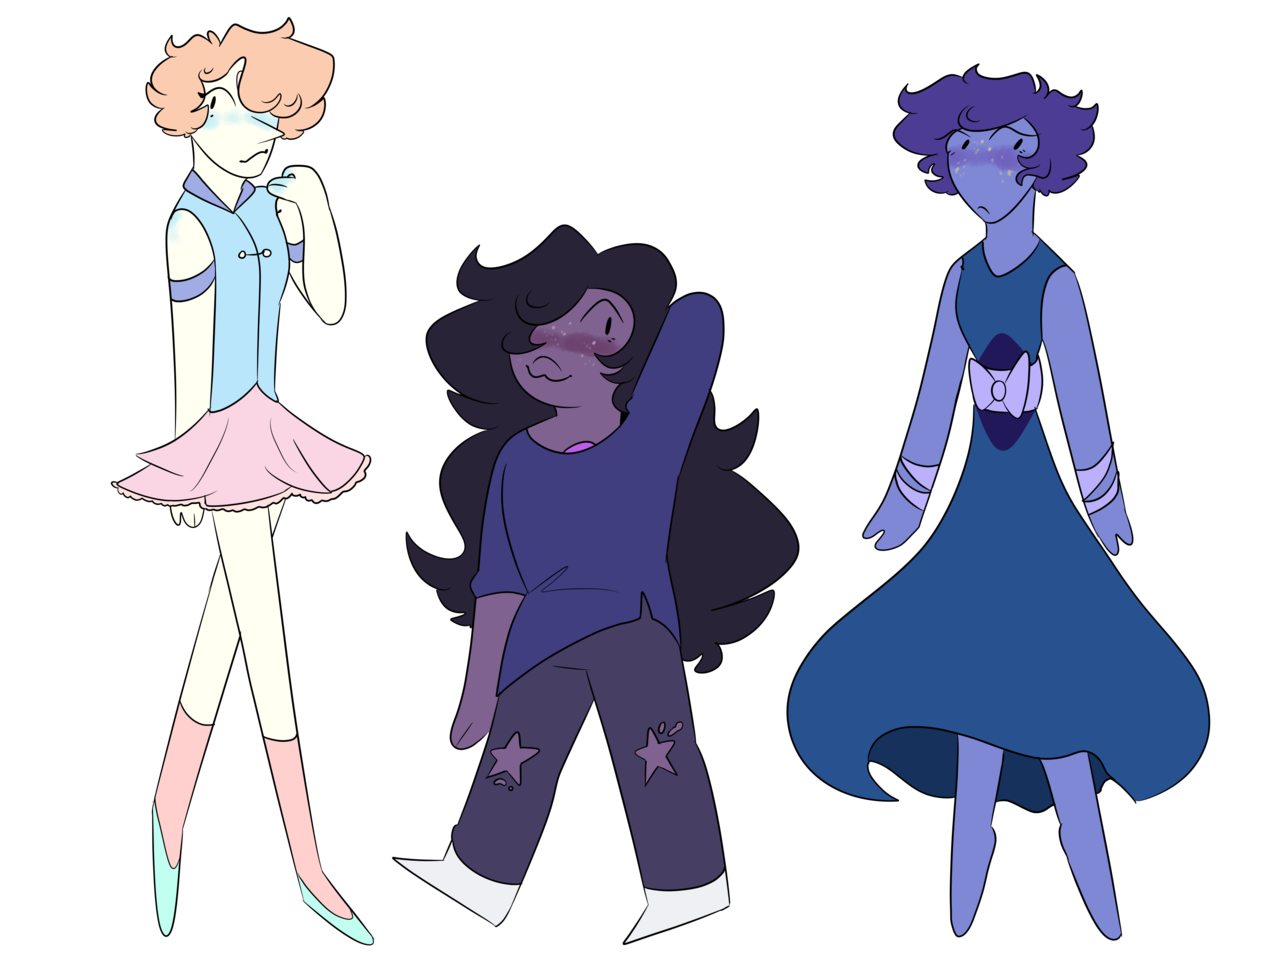 oh look redesigns! (the pearl and amethyst were based on old ones I did)